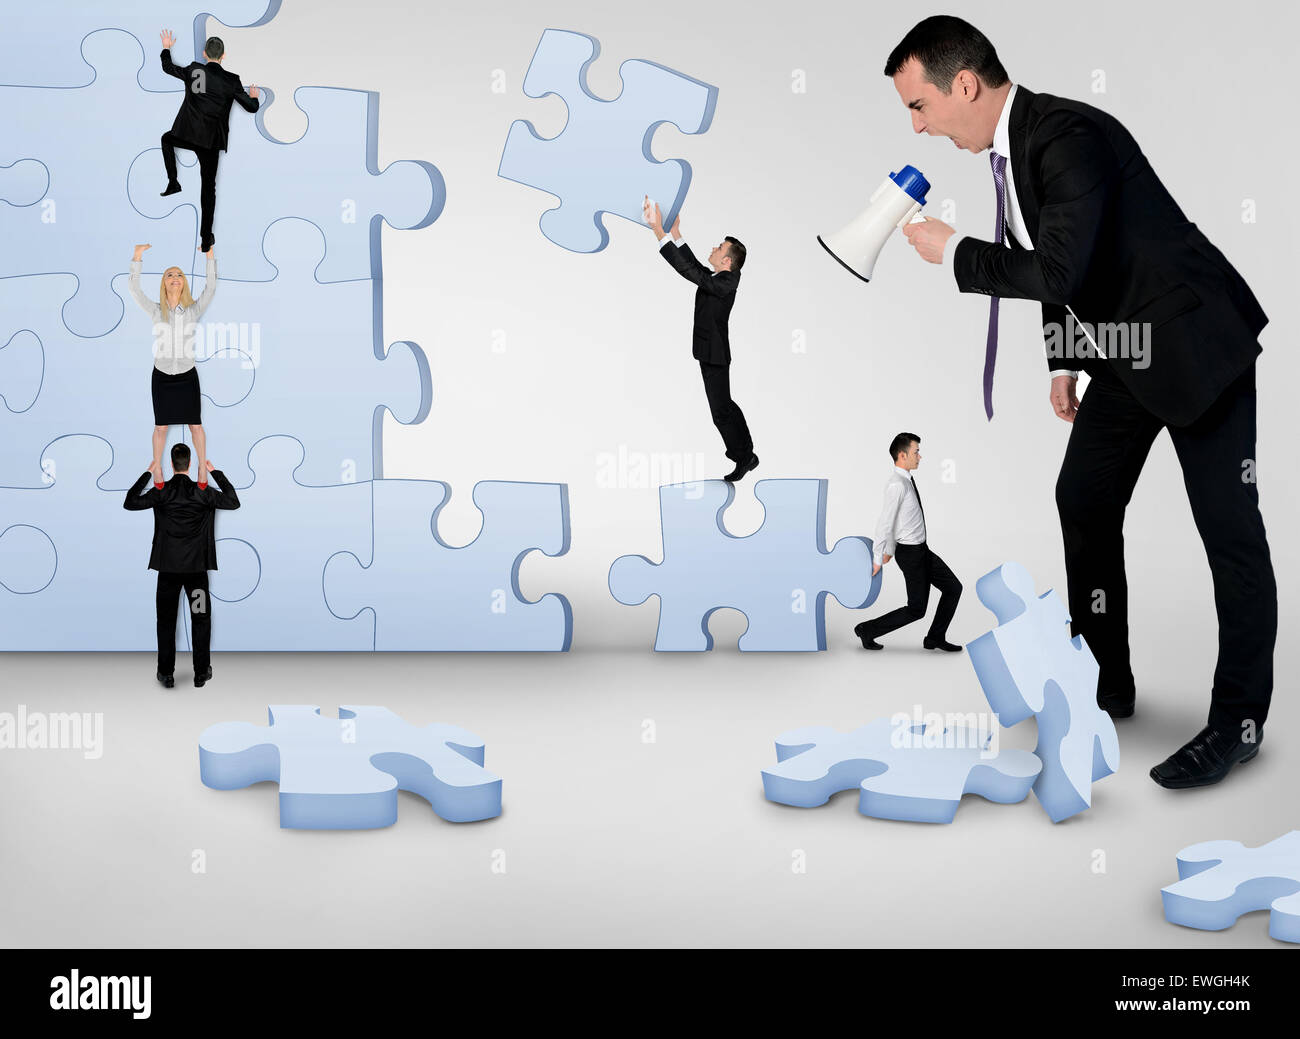 Team Building Great Jigsaw Puzzle Team Stock Illustration